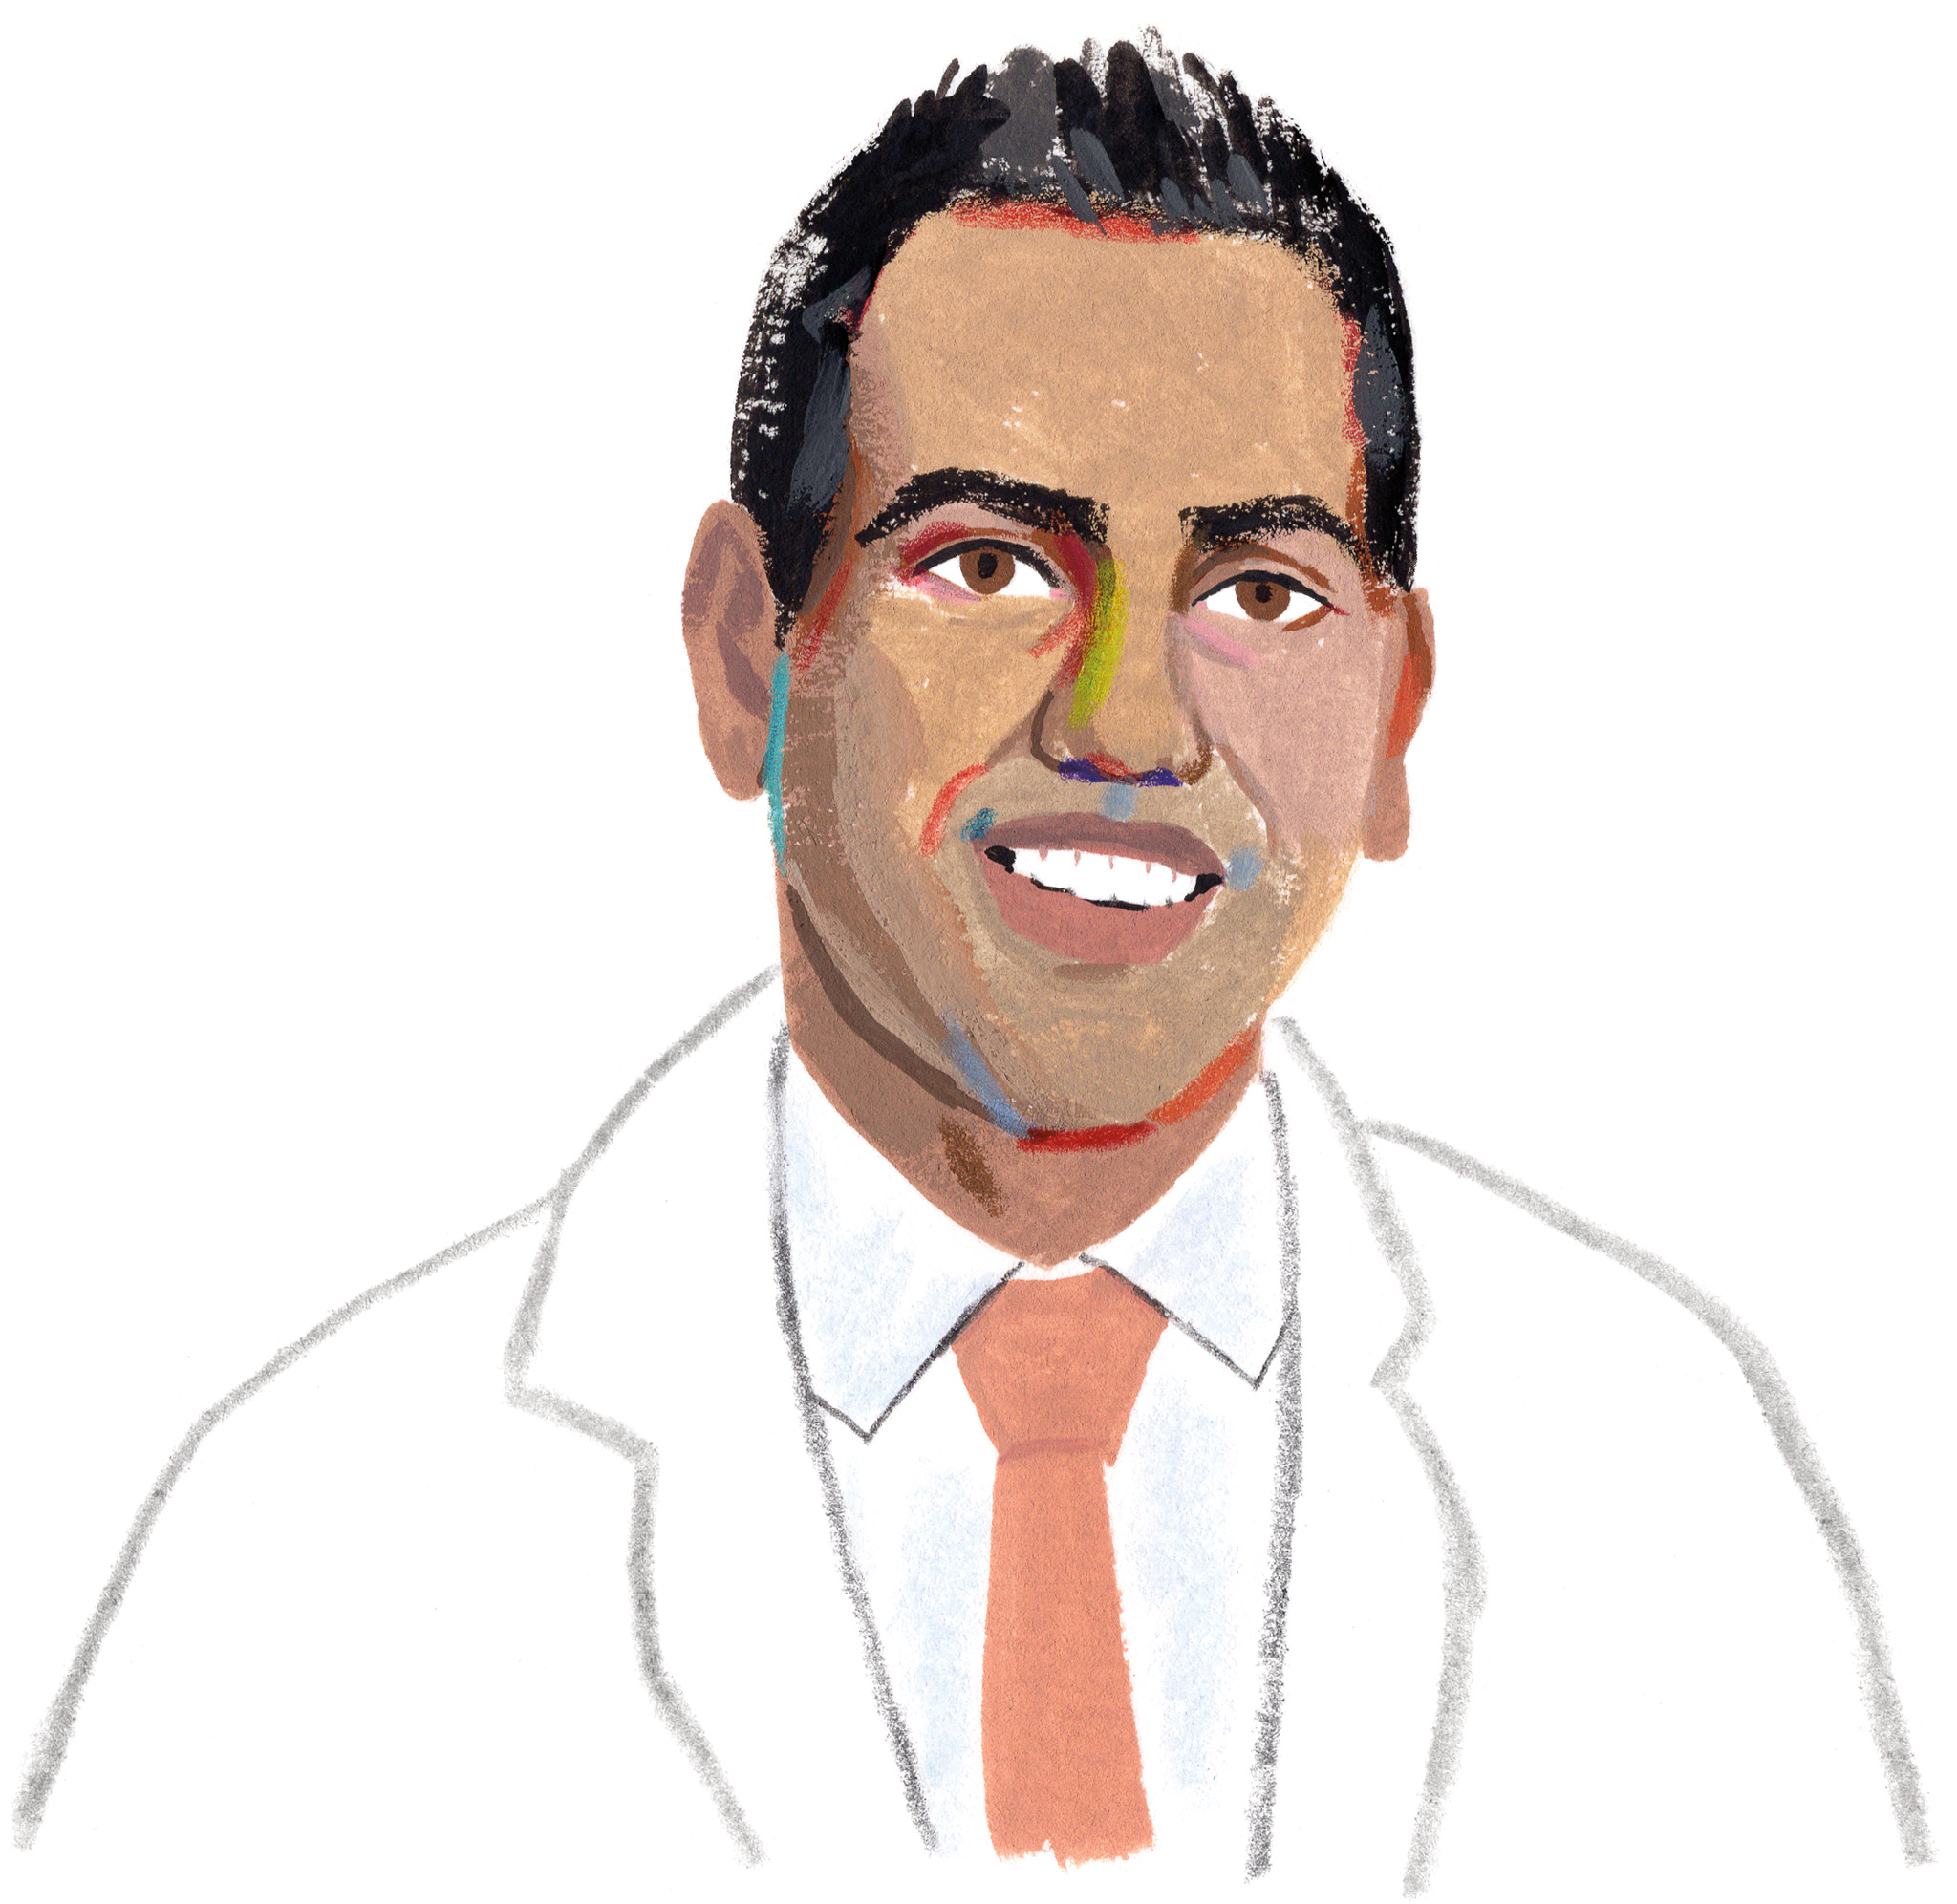 Illustration of a middle aged South Asian man wearing a white coat with a white collared shirt and an orange tie.